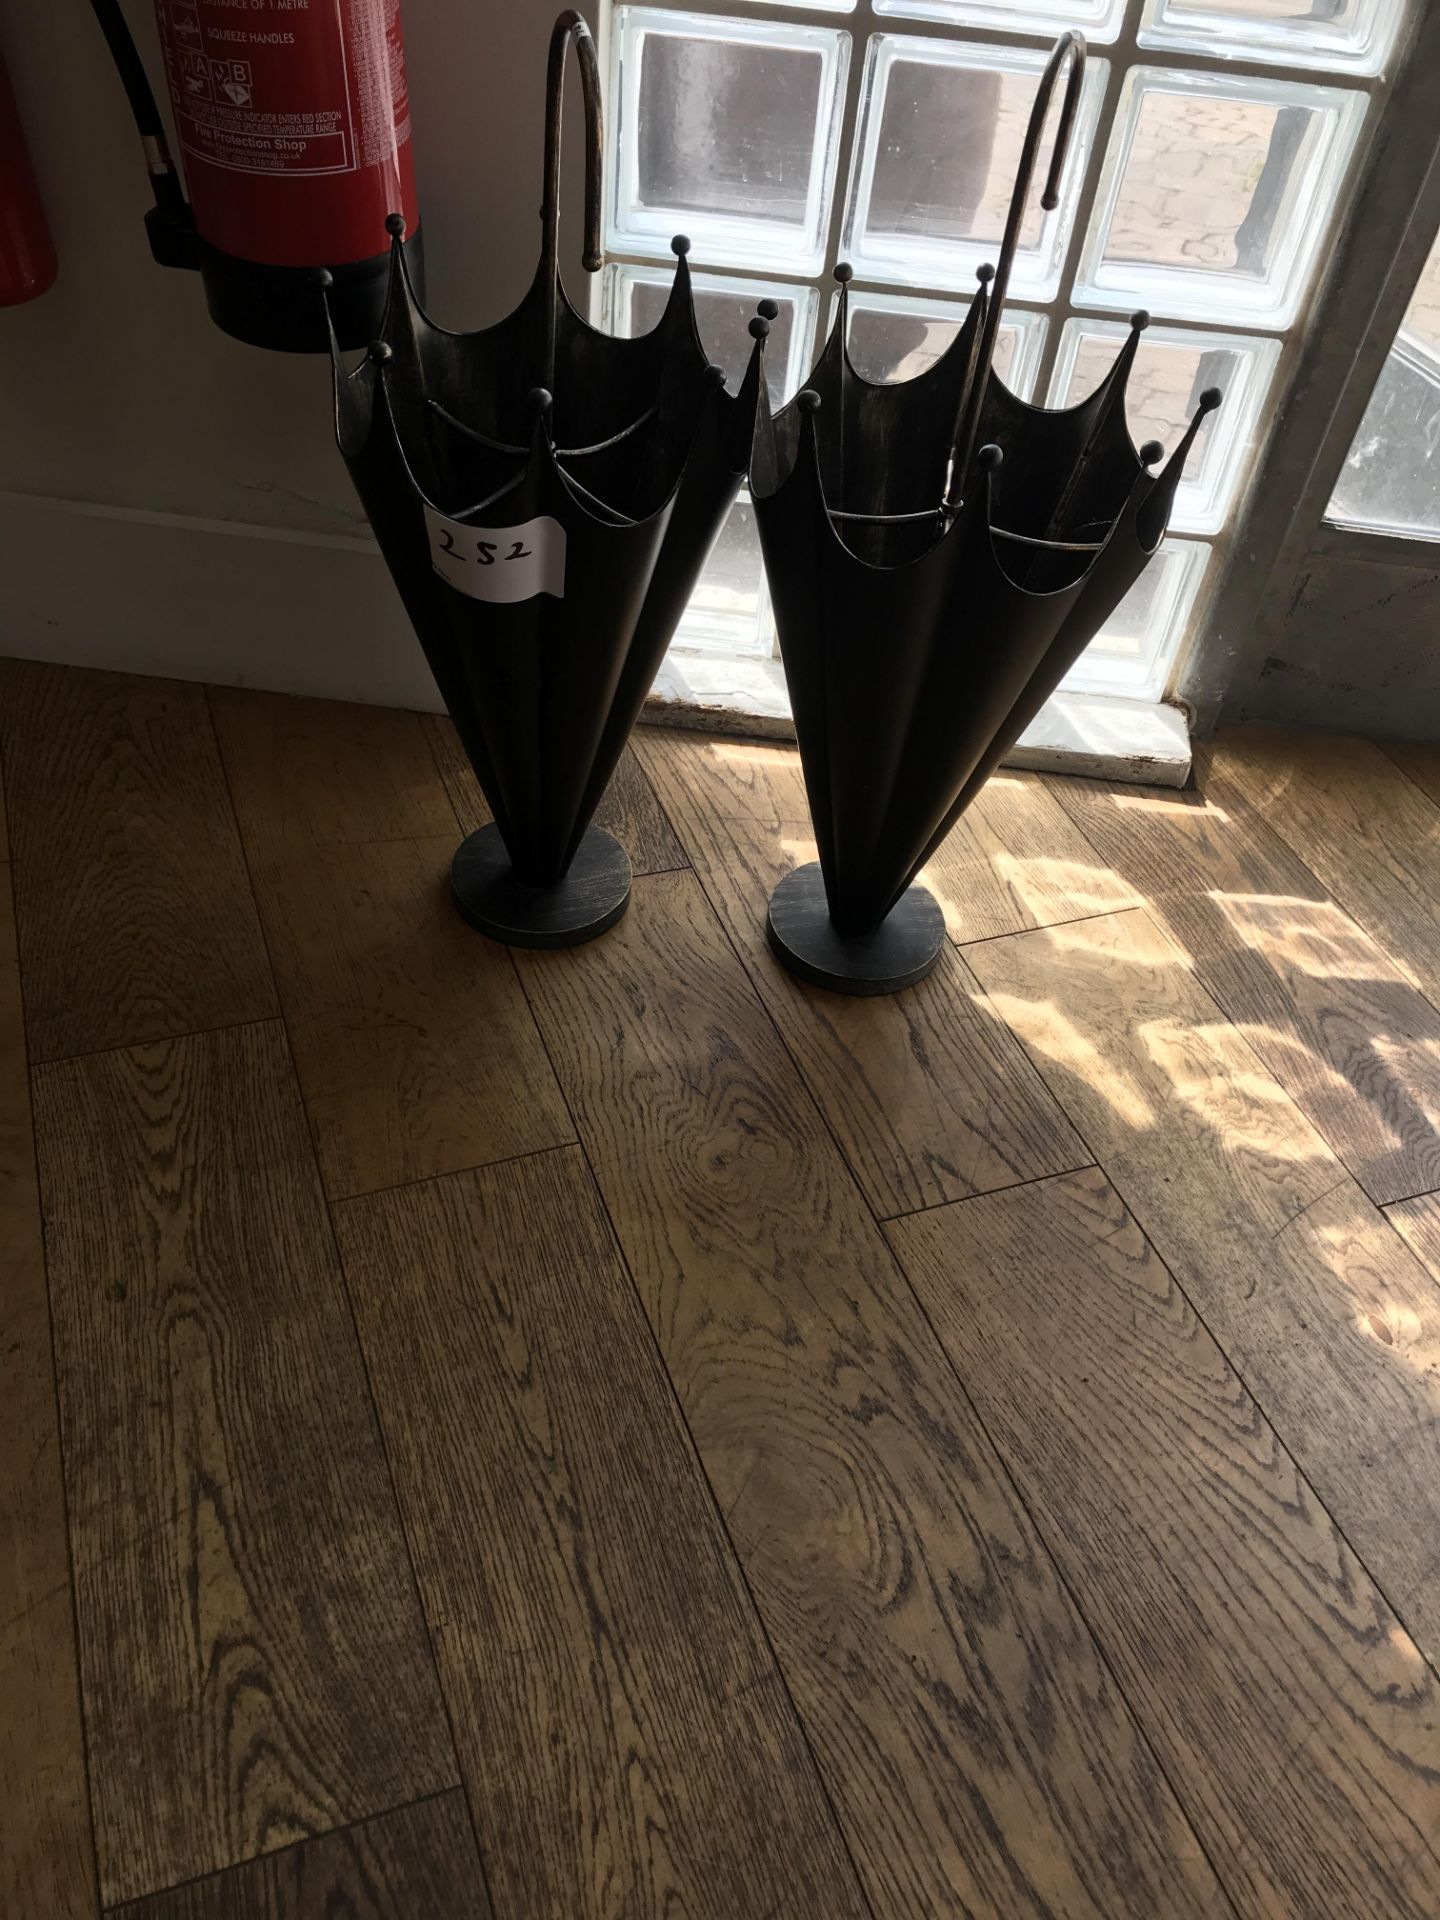 2, Shaped Metal Umbrella Stands As Lotted